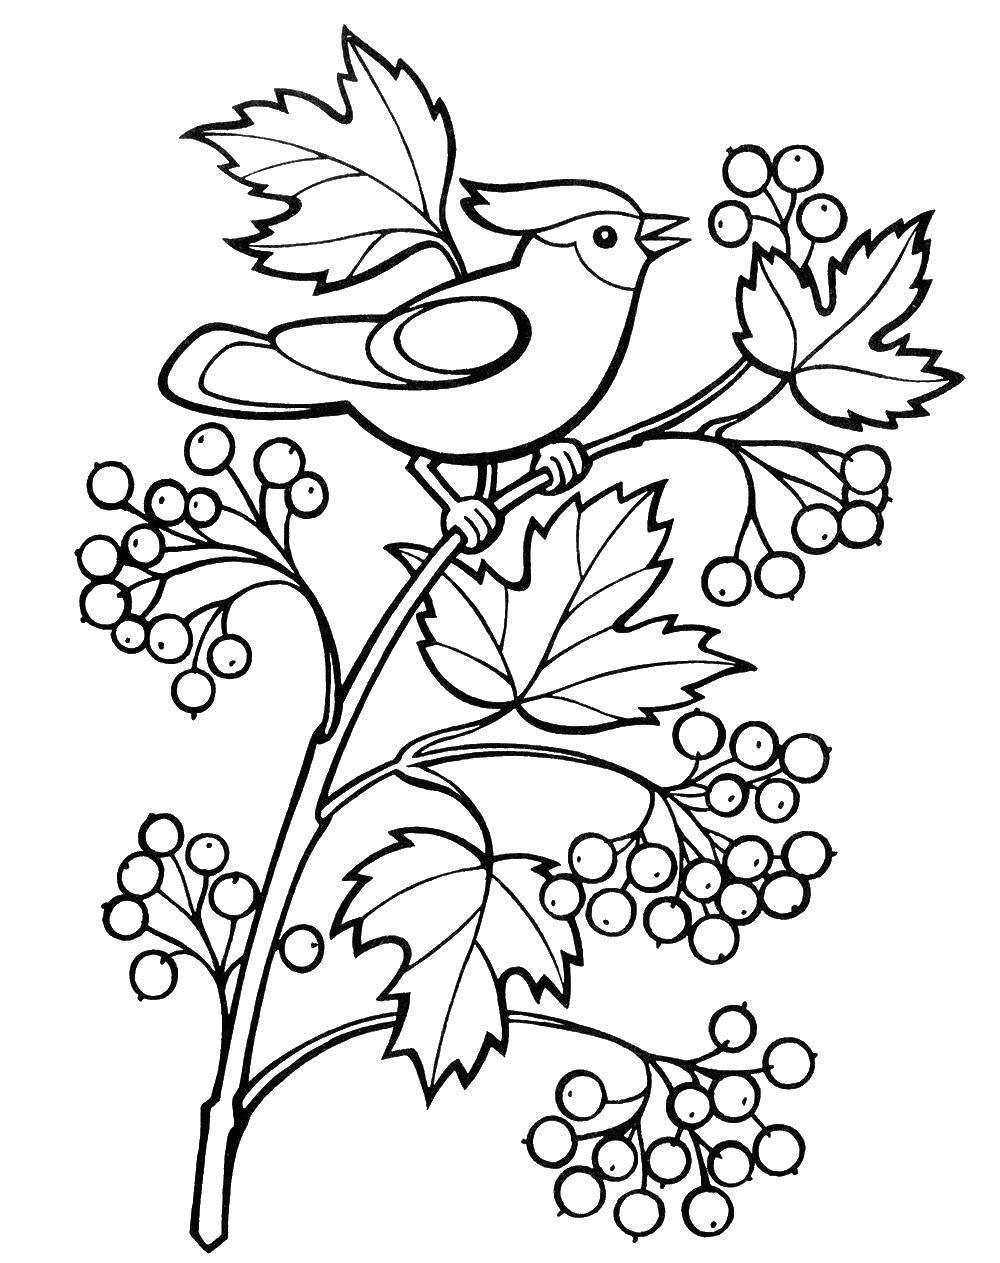 Coloring Chickadee and branch. Category birds. Tags:  titmouse, branch, berries.